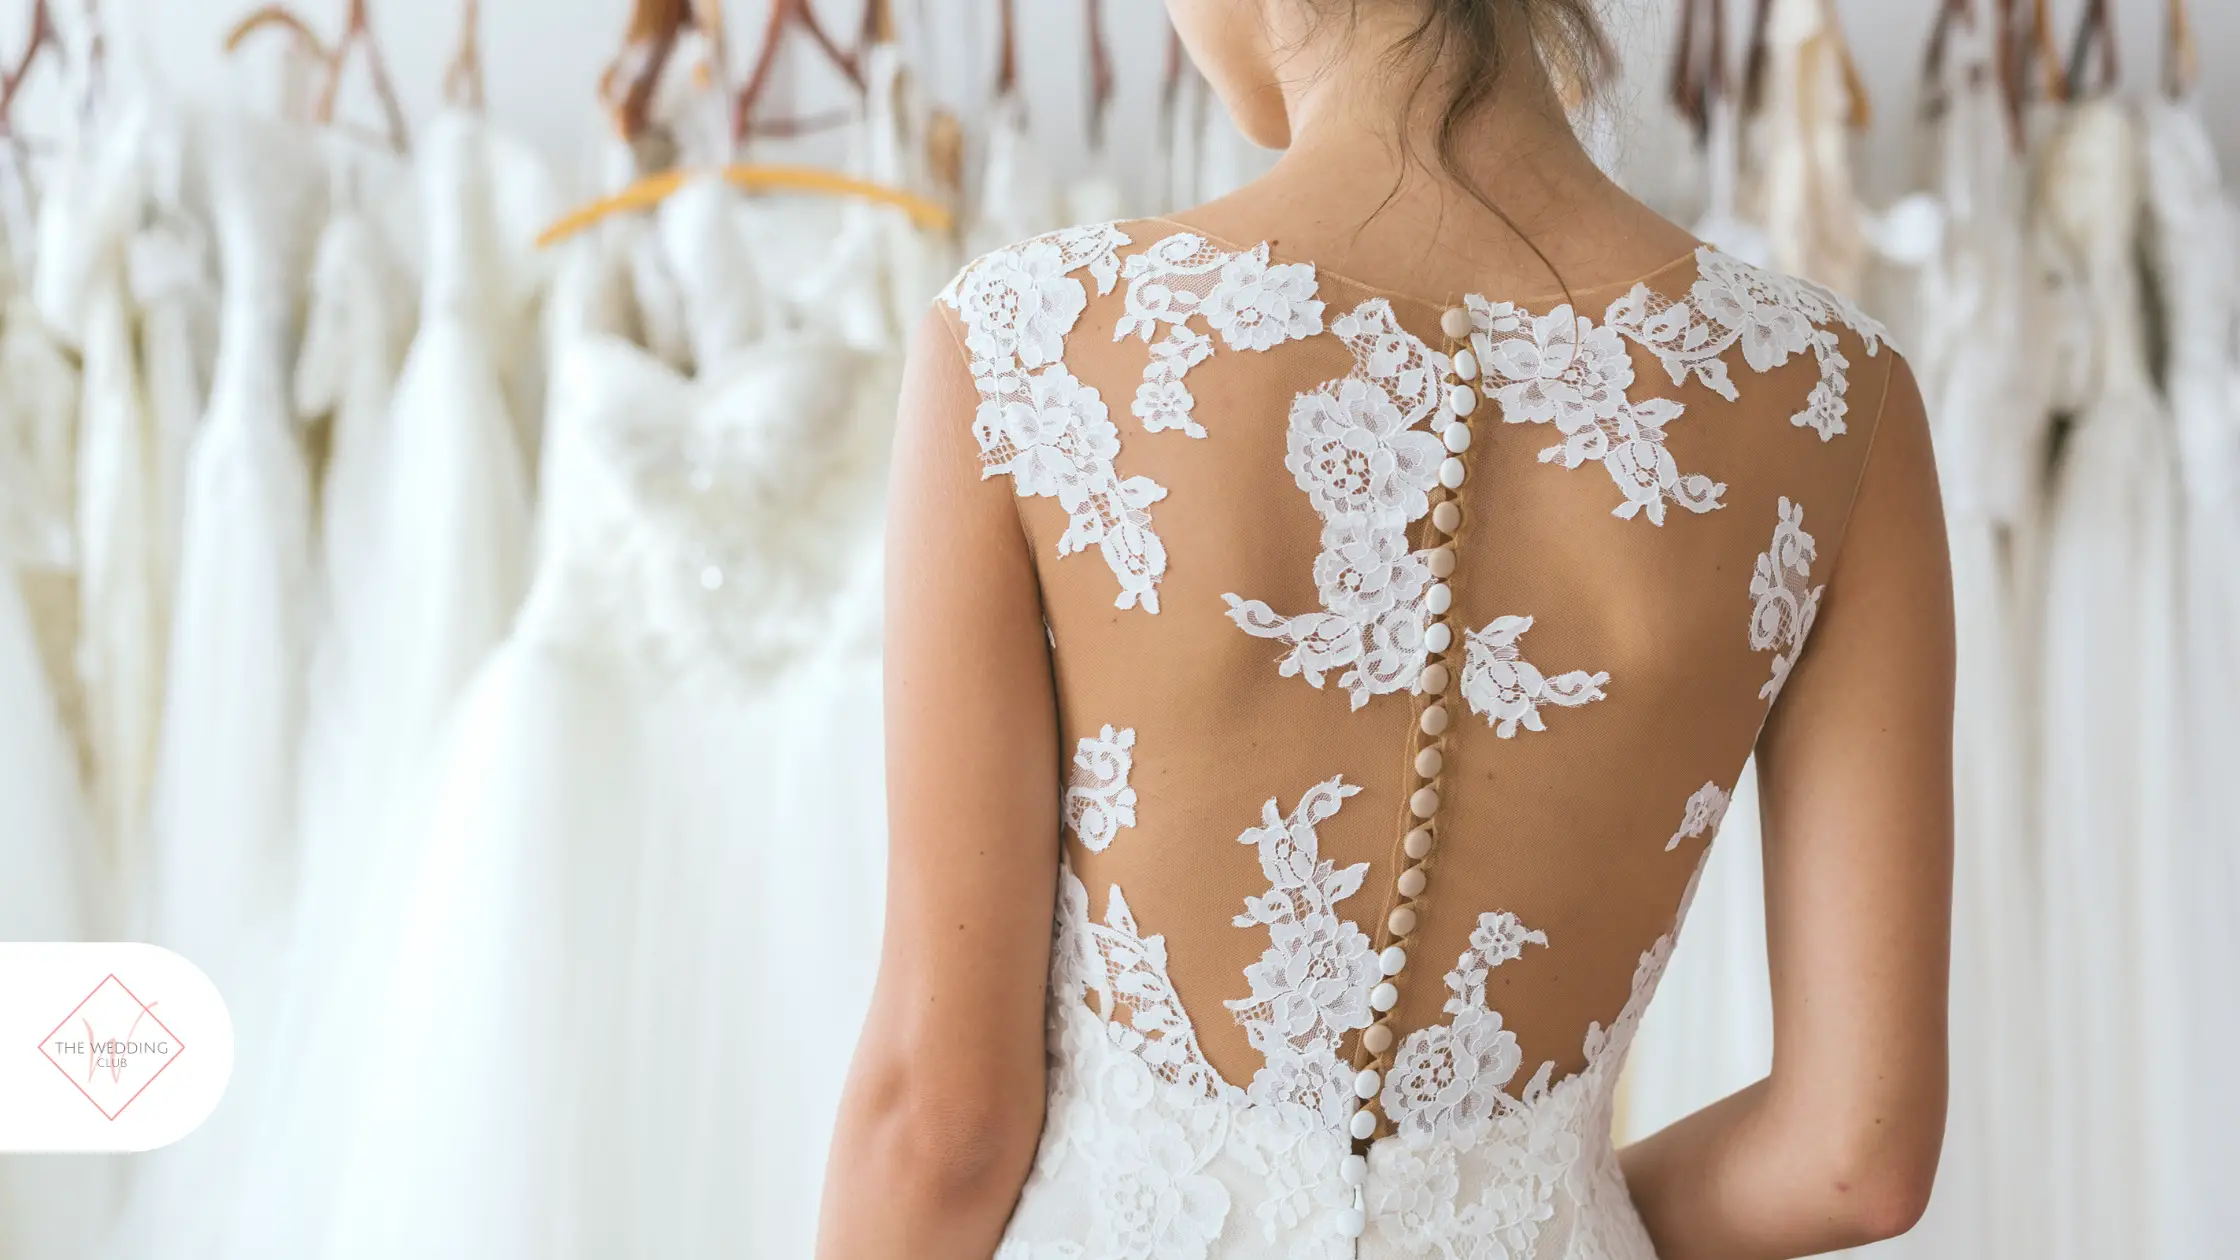 10+ Dreamy wedding dresses of 2019 you’ll love from Etsy